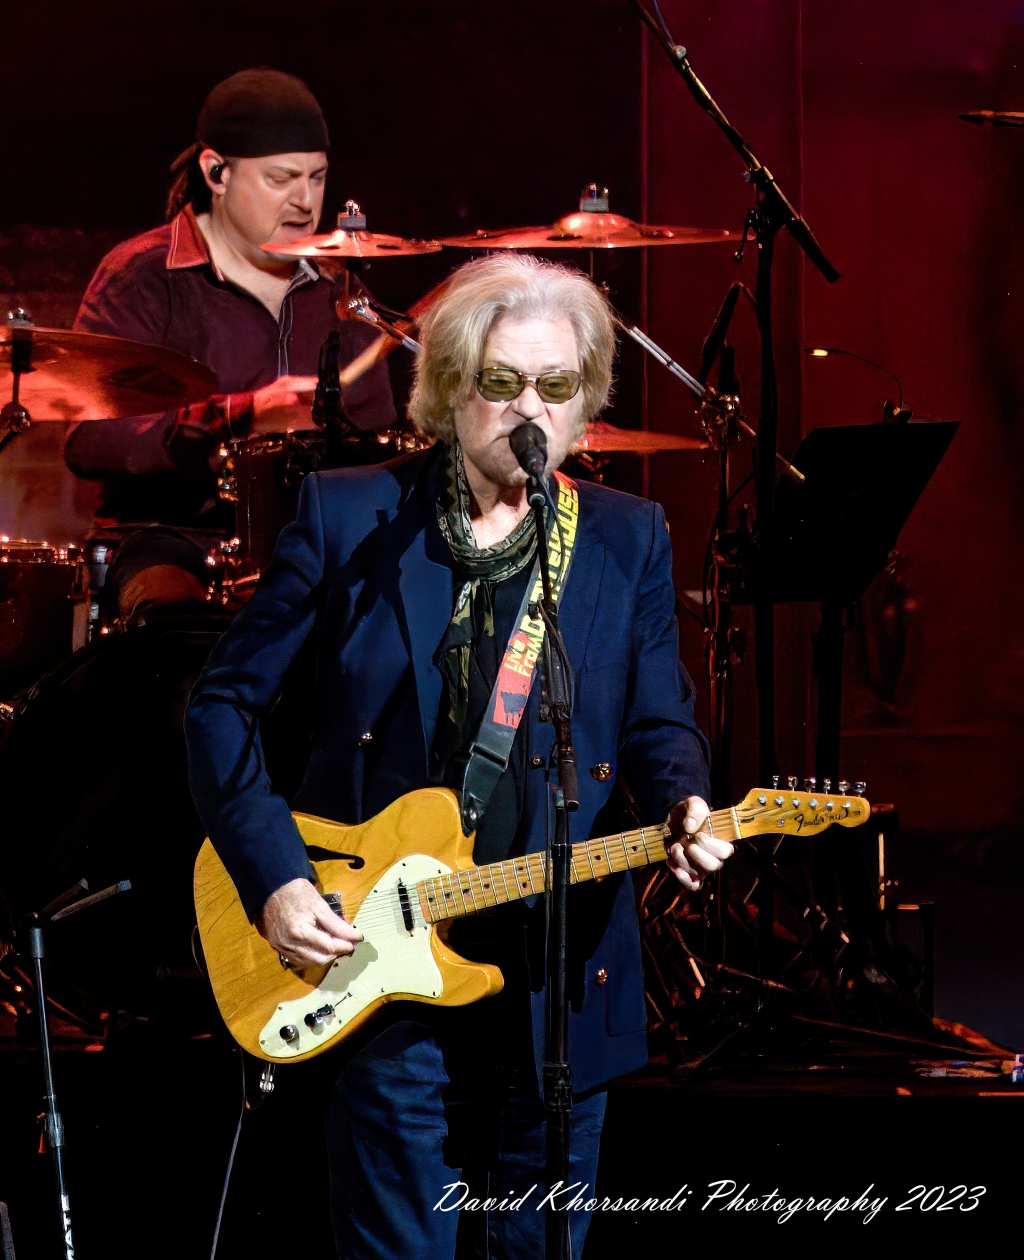 Daryl Hall and Todd Rundgren Pantages Theater 11/6/2023